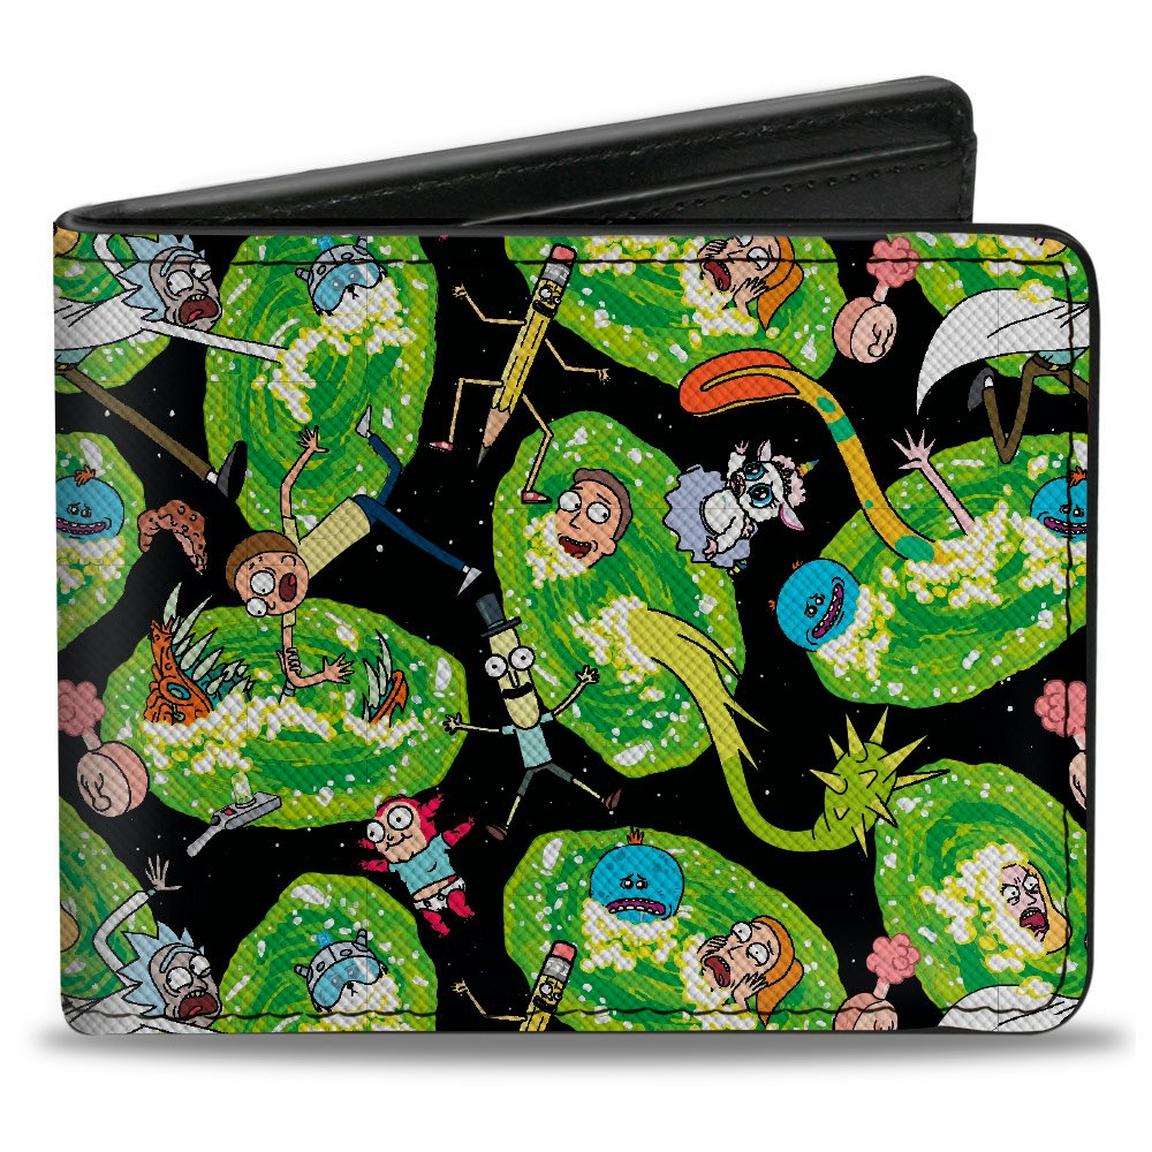 Buckle-Down Rick and Morty Rick and Morty Polyurethane Bifold Wallet, Size: One Size, Buckle Down -  PUW-RMYF